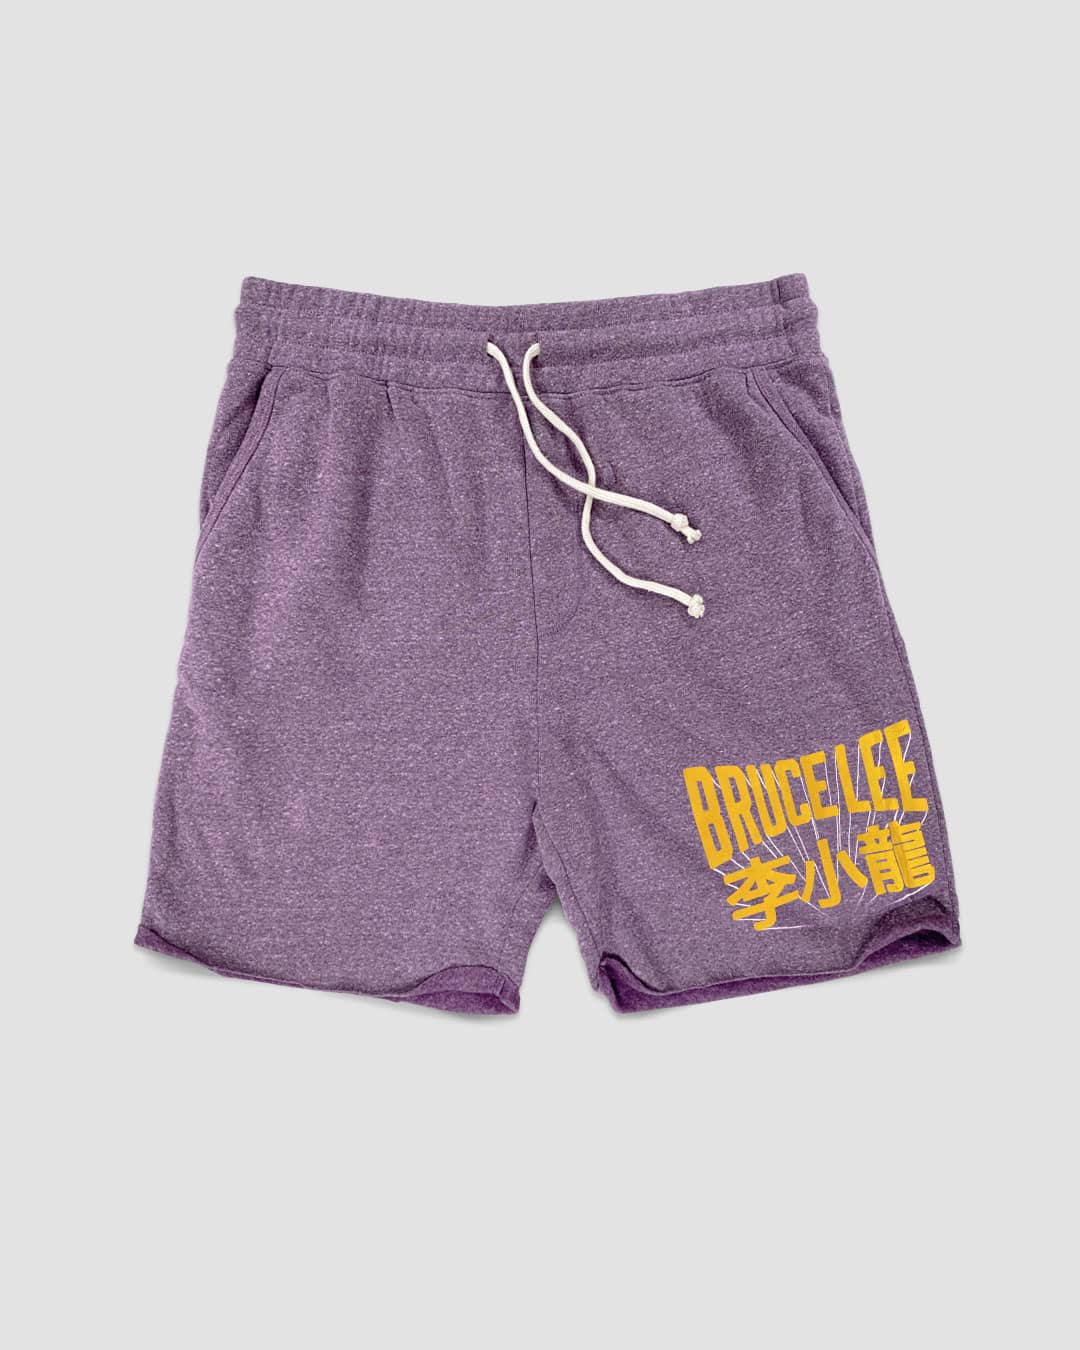 Bruce Lee Purple Shorts - Roots of Fight Canada